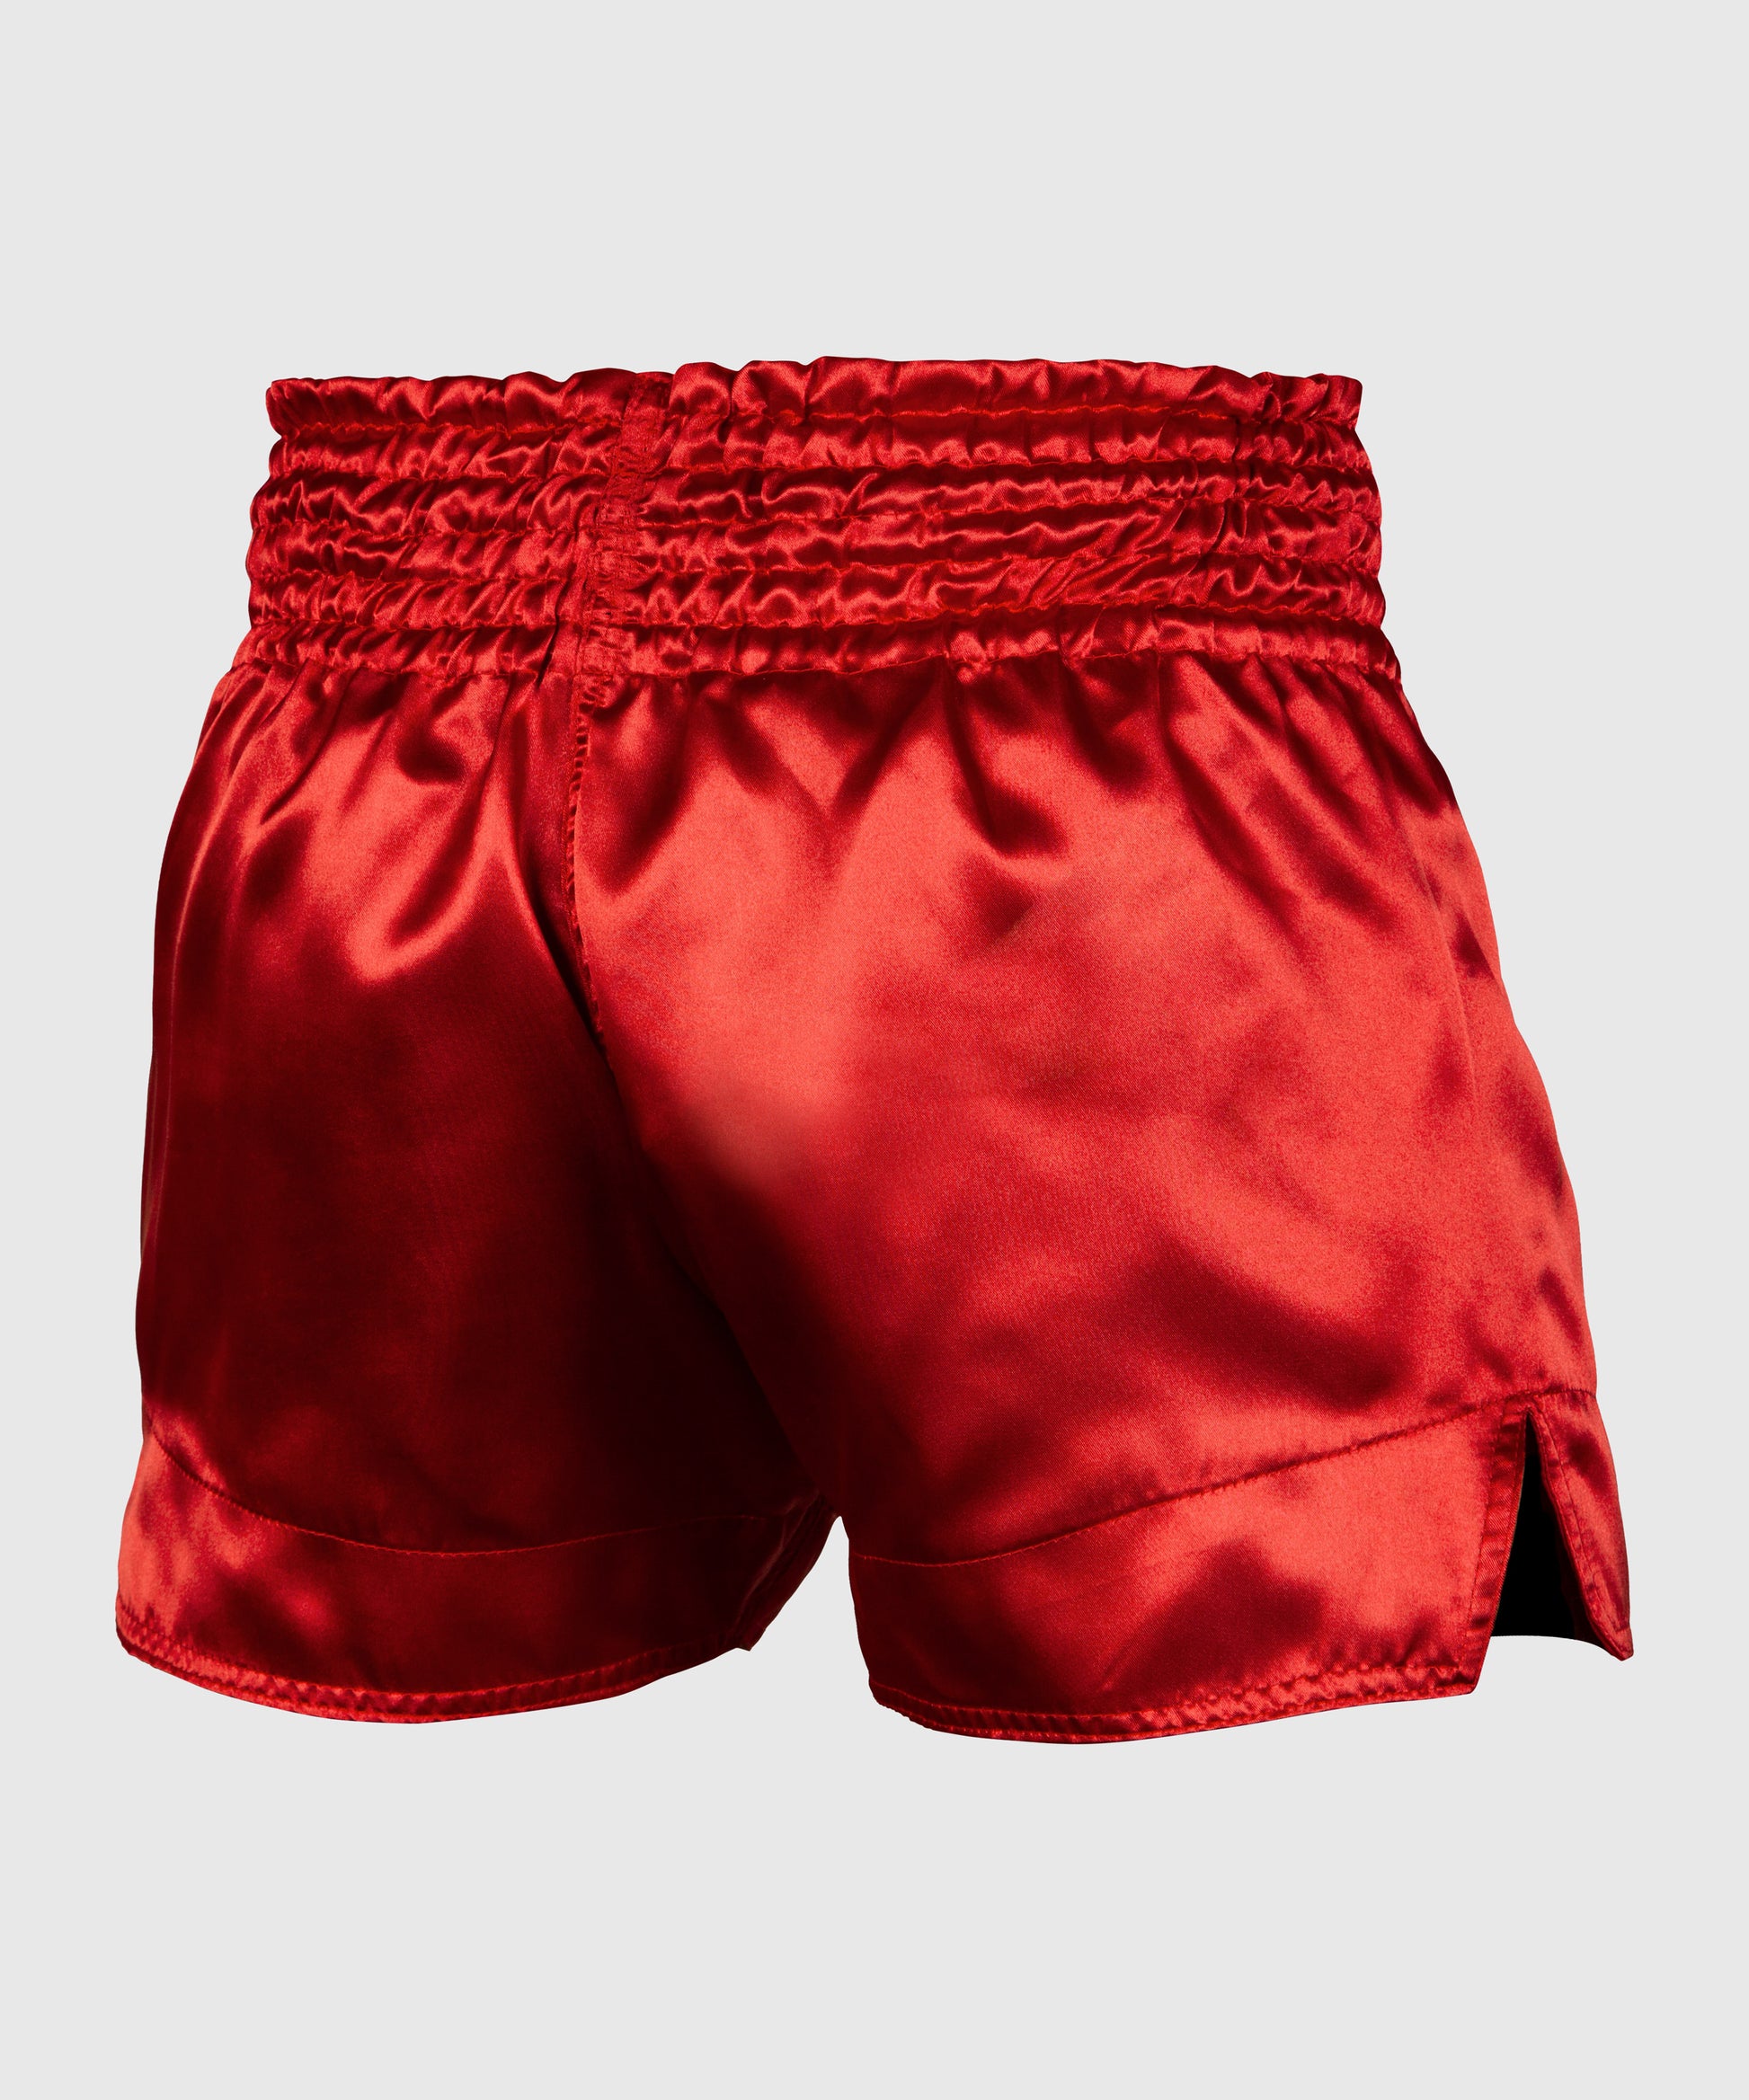 HONEST REVIEW of All My Muay Thai Shorts! 